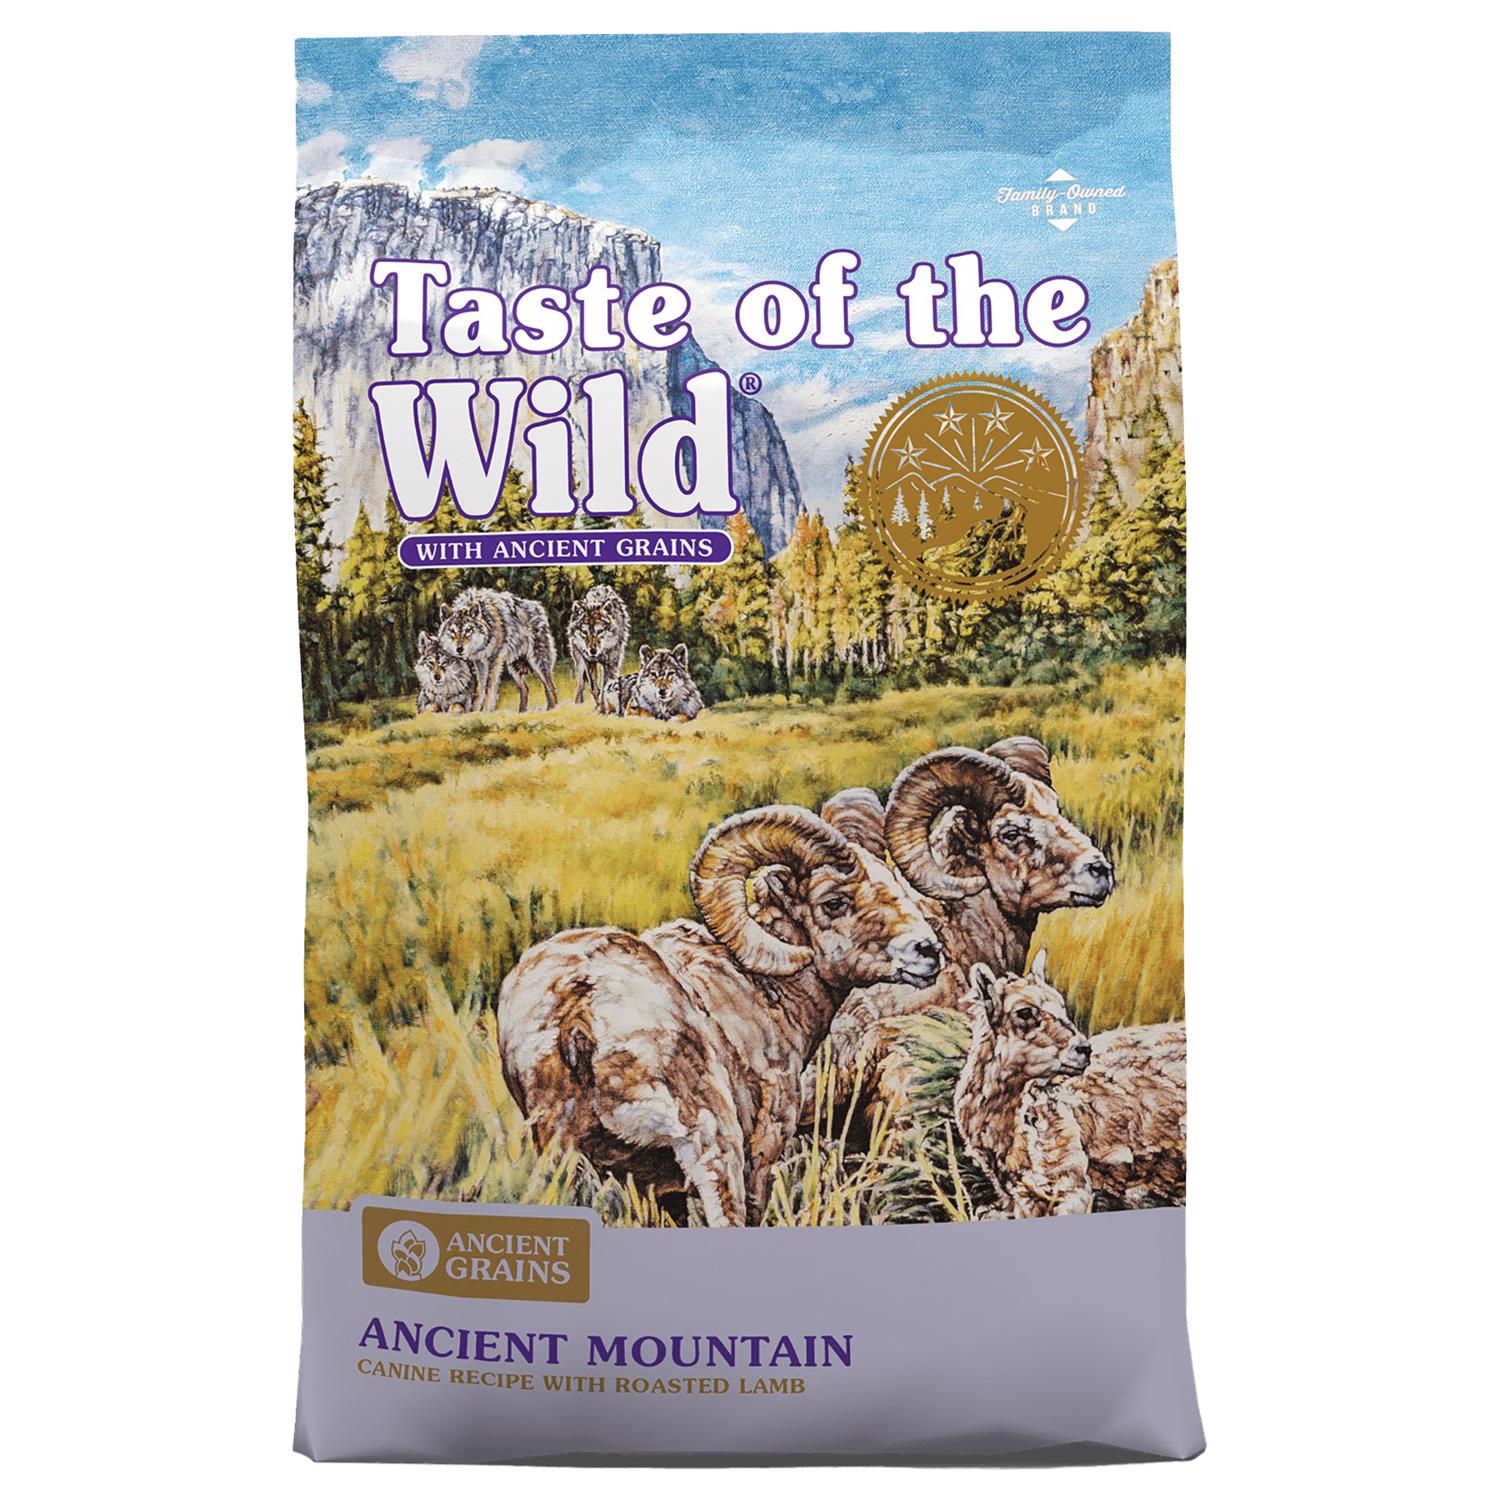 Photos - Other interior and decor Taste of the Wild Adult Lamb Dry Dog Food 28 lb 9681 